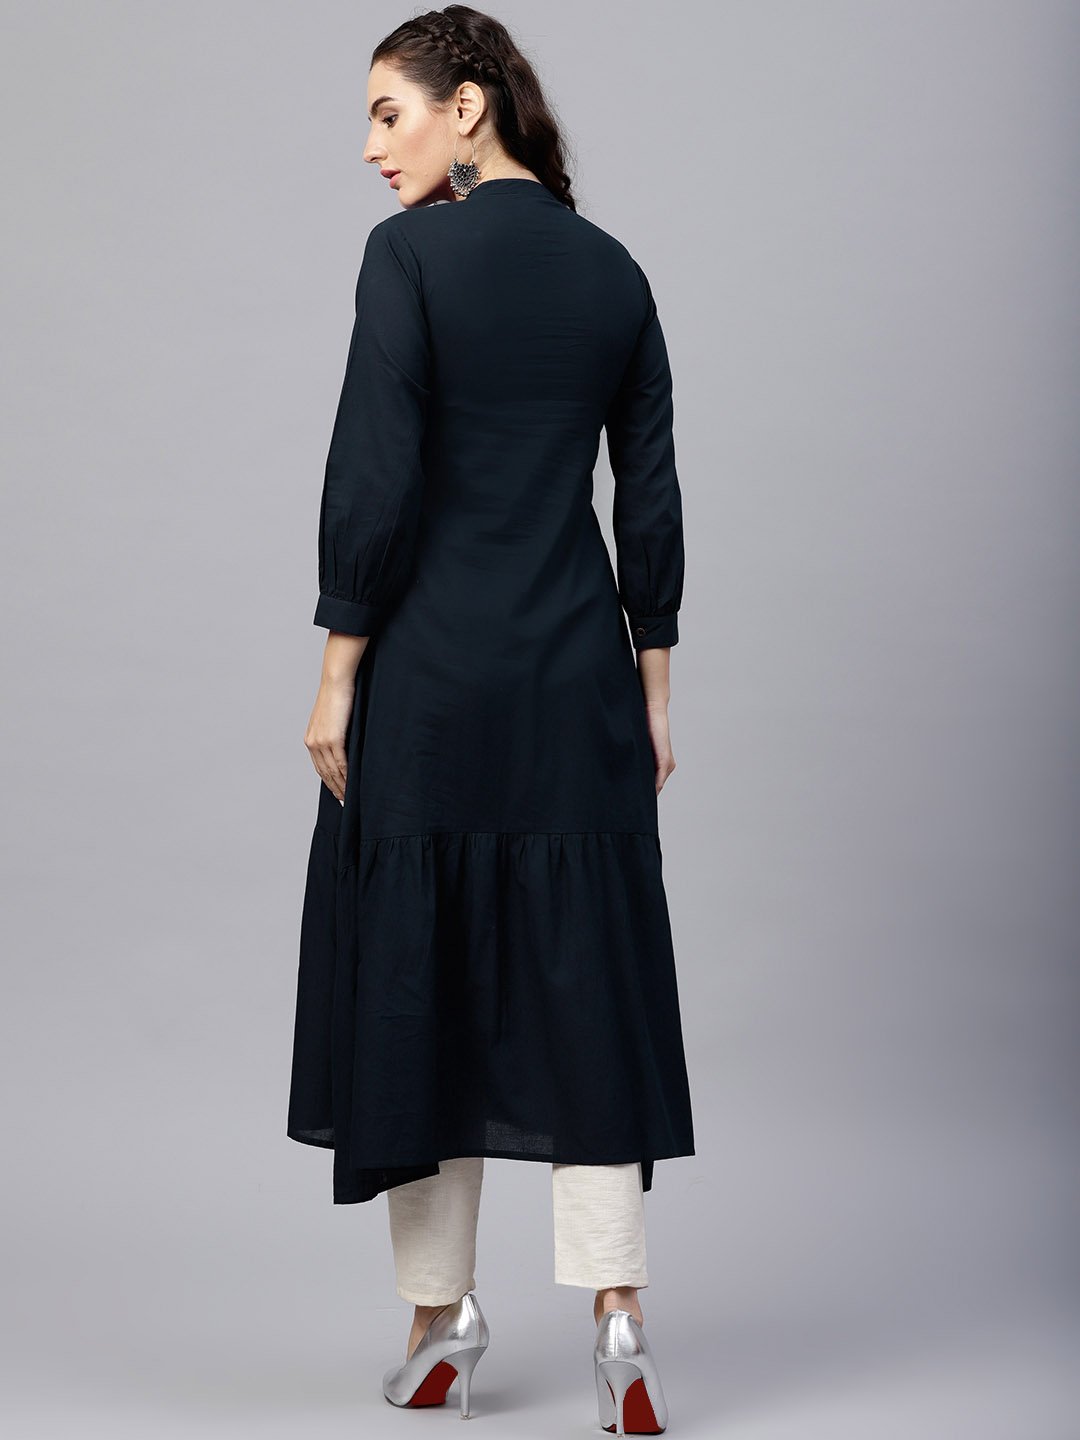 Women's Navy Blue Round Neck A-Line Kurta With Front Placket And Cuffed Full Sleeves - Nayo Clothing